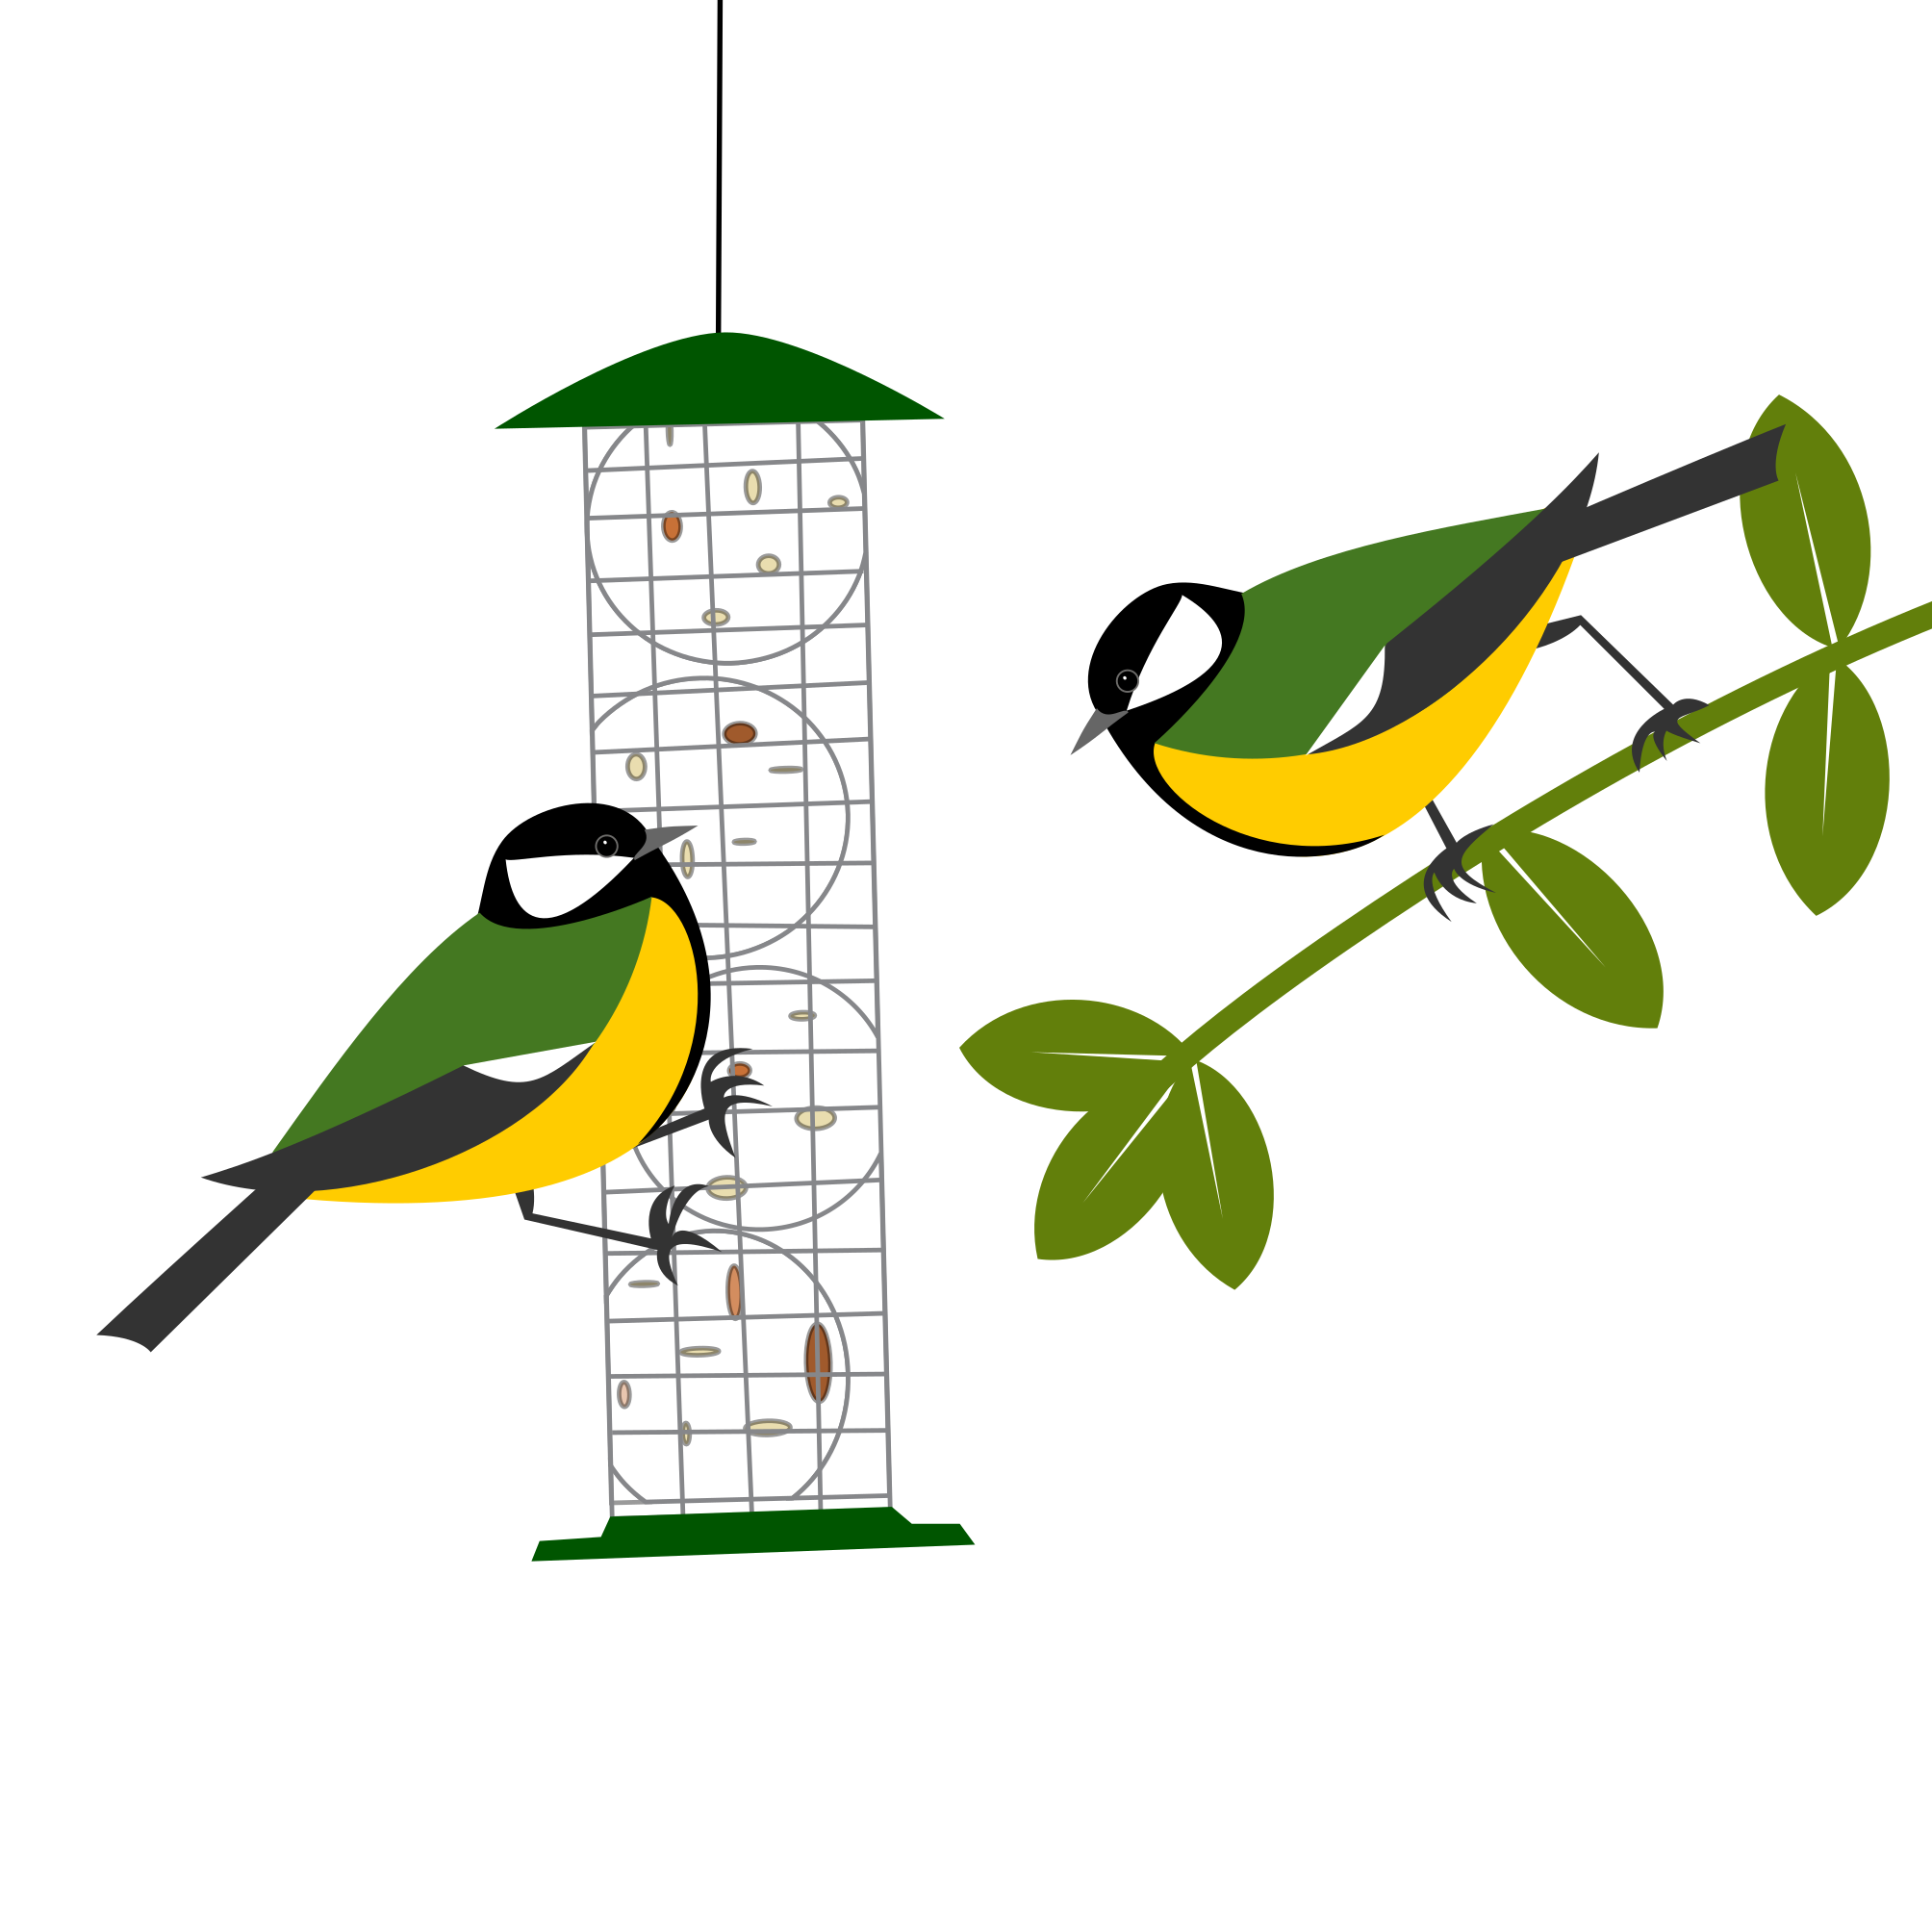 two great tits in a stand off over whose turn it is on the feeder. Simply drawn with flat bold colours on a white background